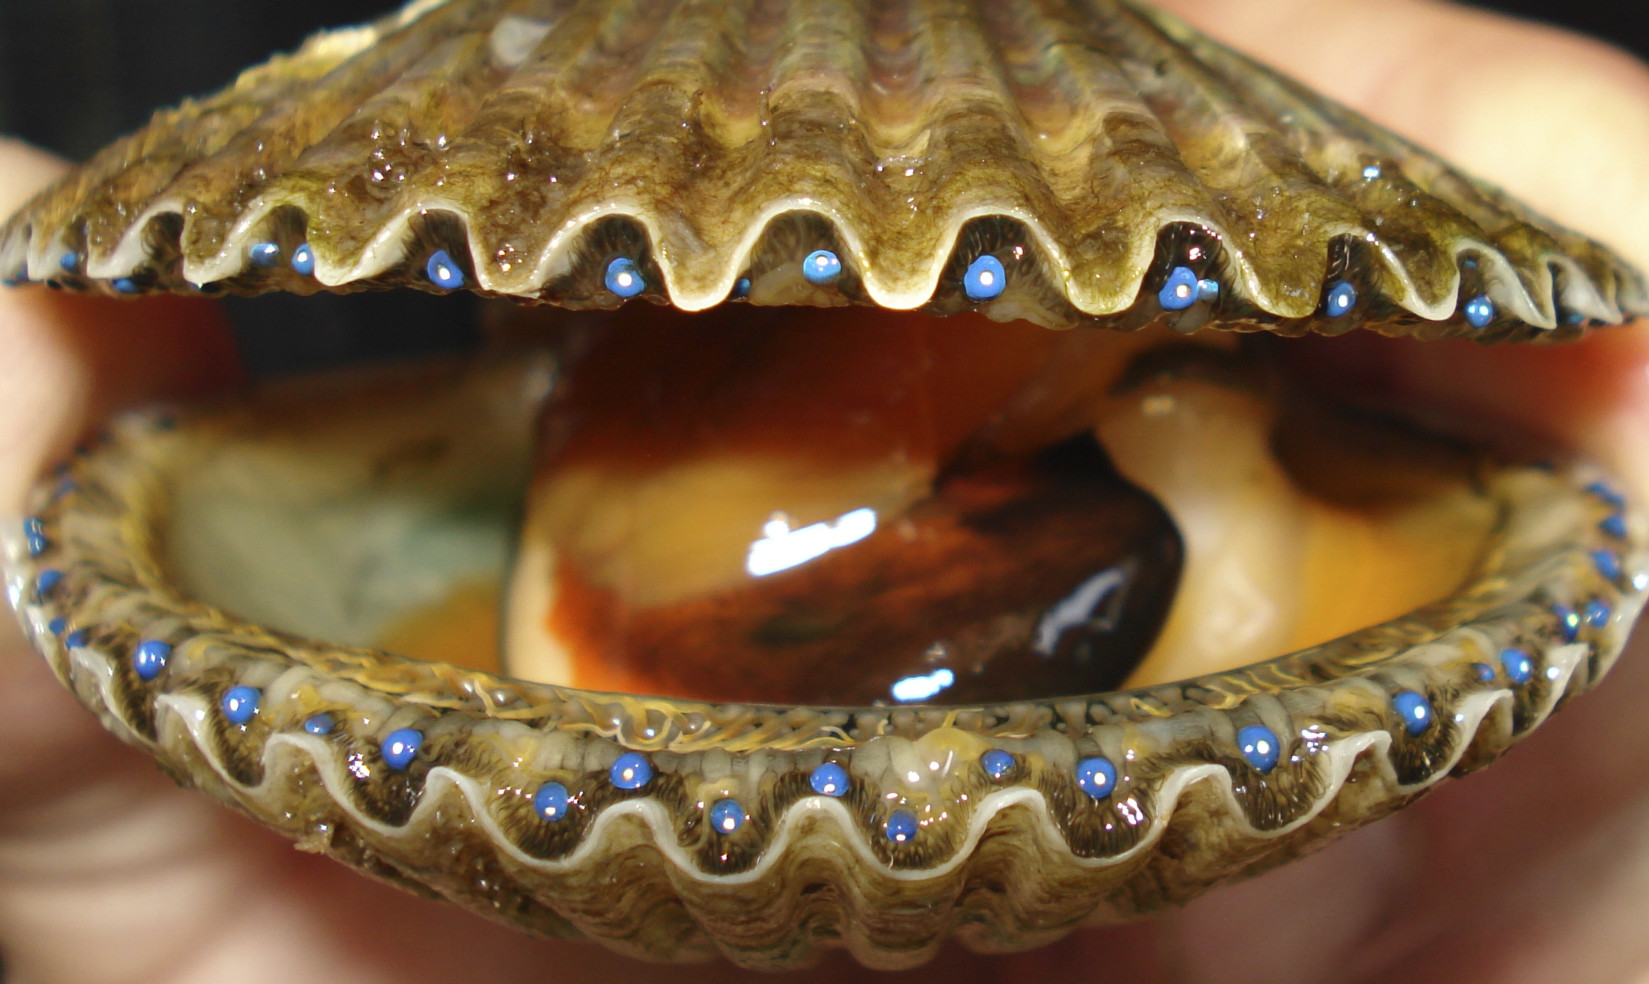 THE FLORIDA BAY SCALLOP

BAY SHELLFISH HAS BEEN COMMITTED TO BAY SCALLOP RESTORATION OVER THE LAST THIRTEEN YEARS